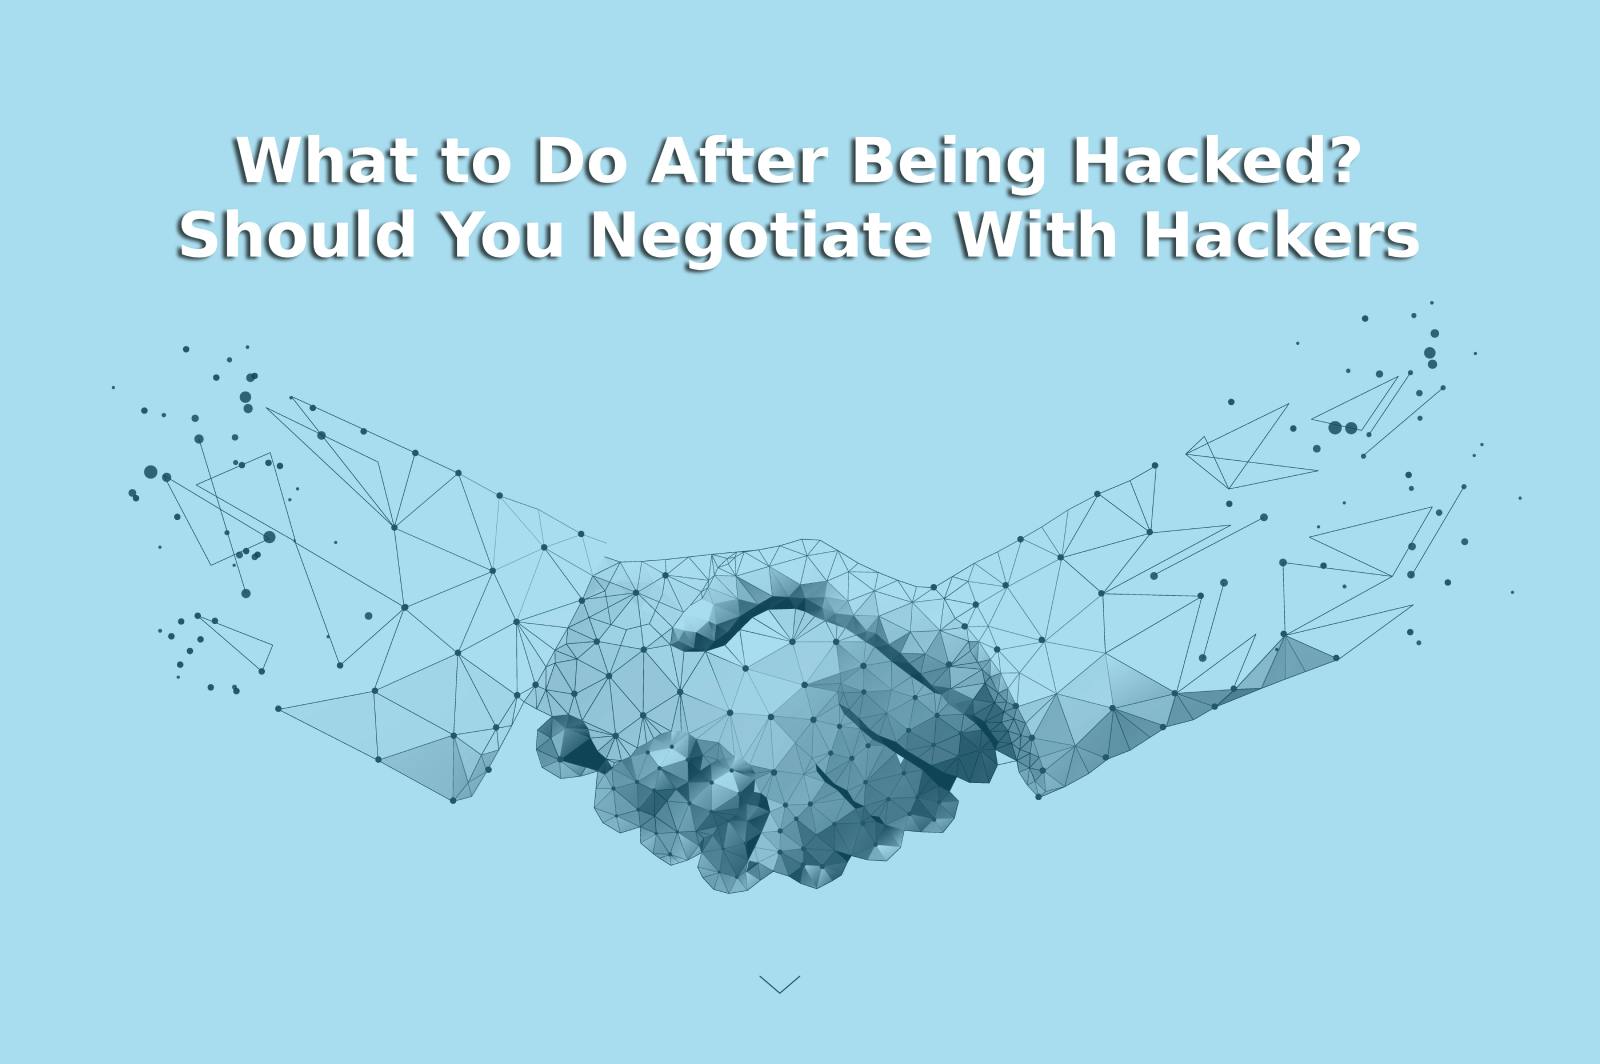 What to Do After Being Hacked? Should You Negotiate With Hackers